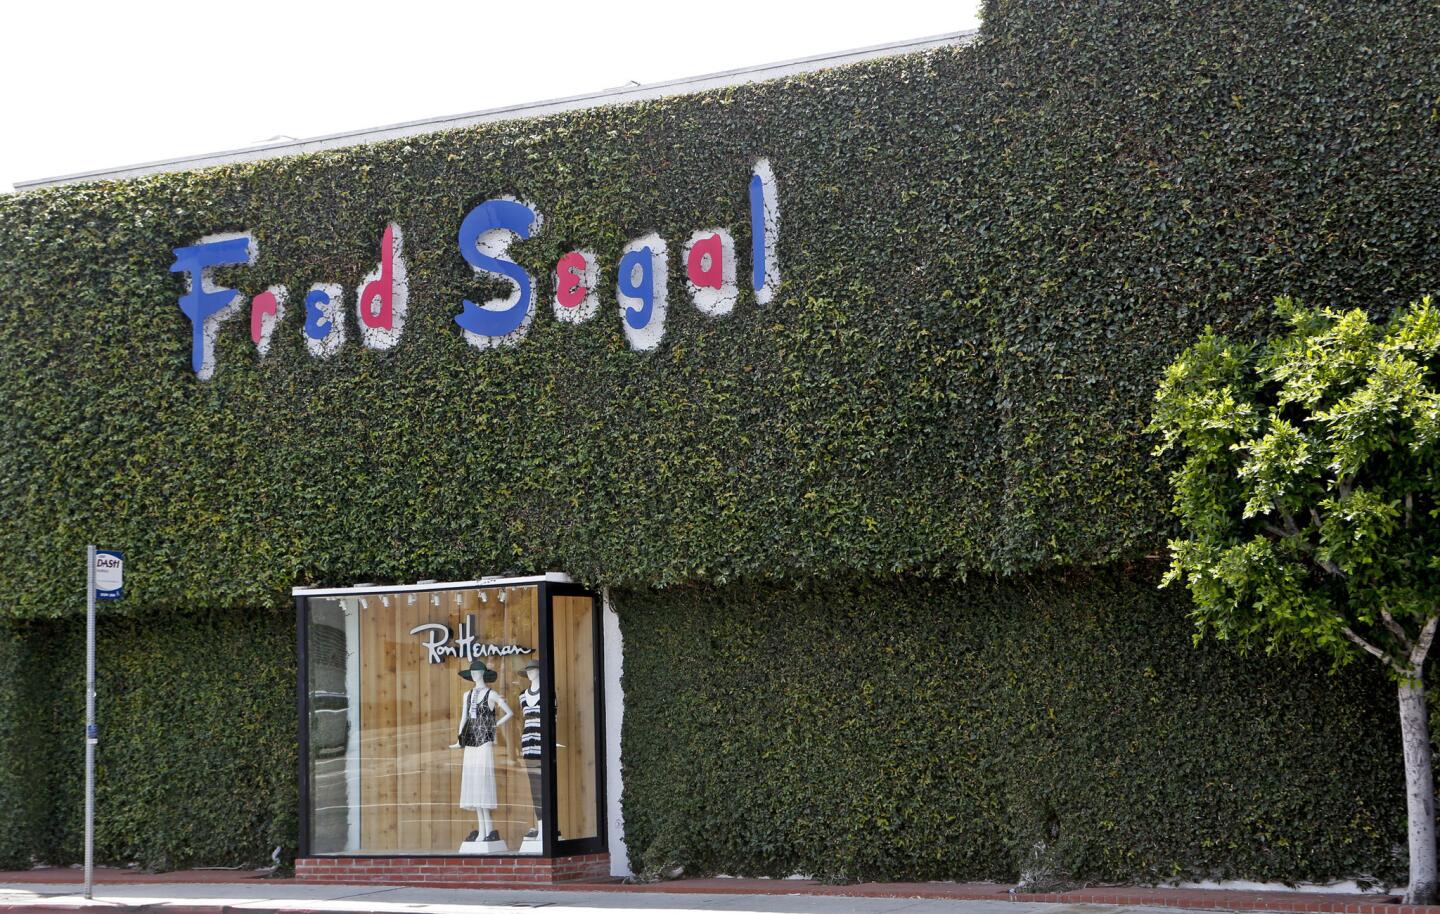 Outside retailer Fred Segal on Melrose Avenue in West Hollywood.